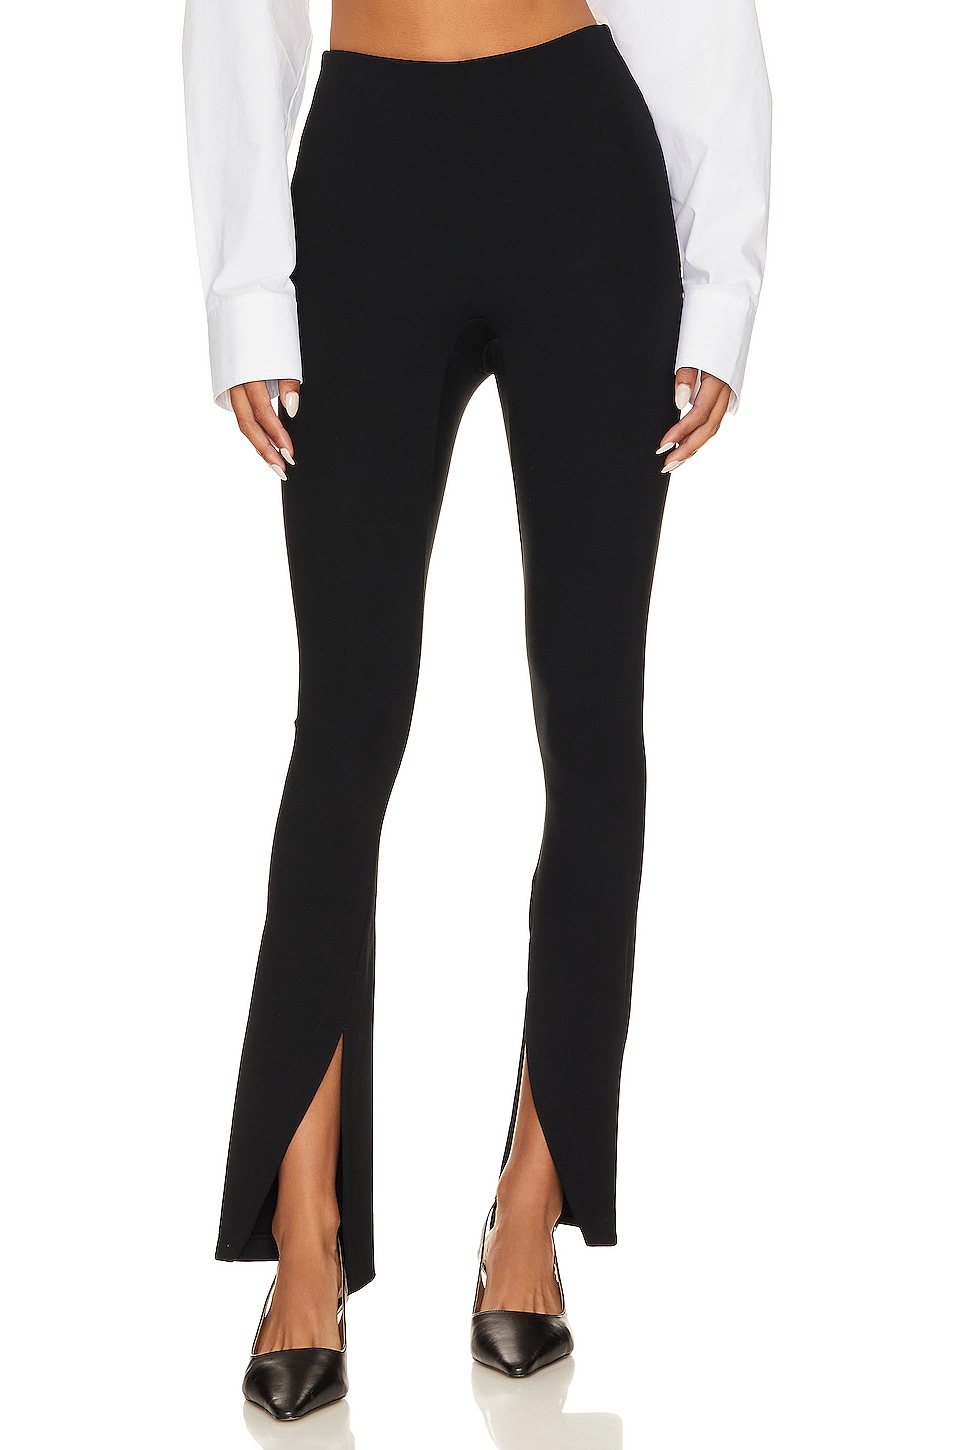 SPANX Women's Ankle Piped Skinny Perfect Pants, Classic Black, XS